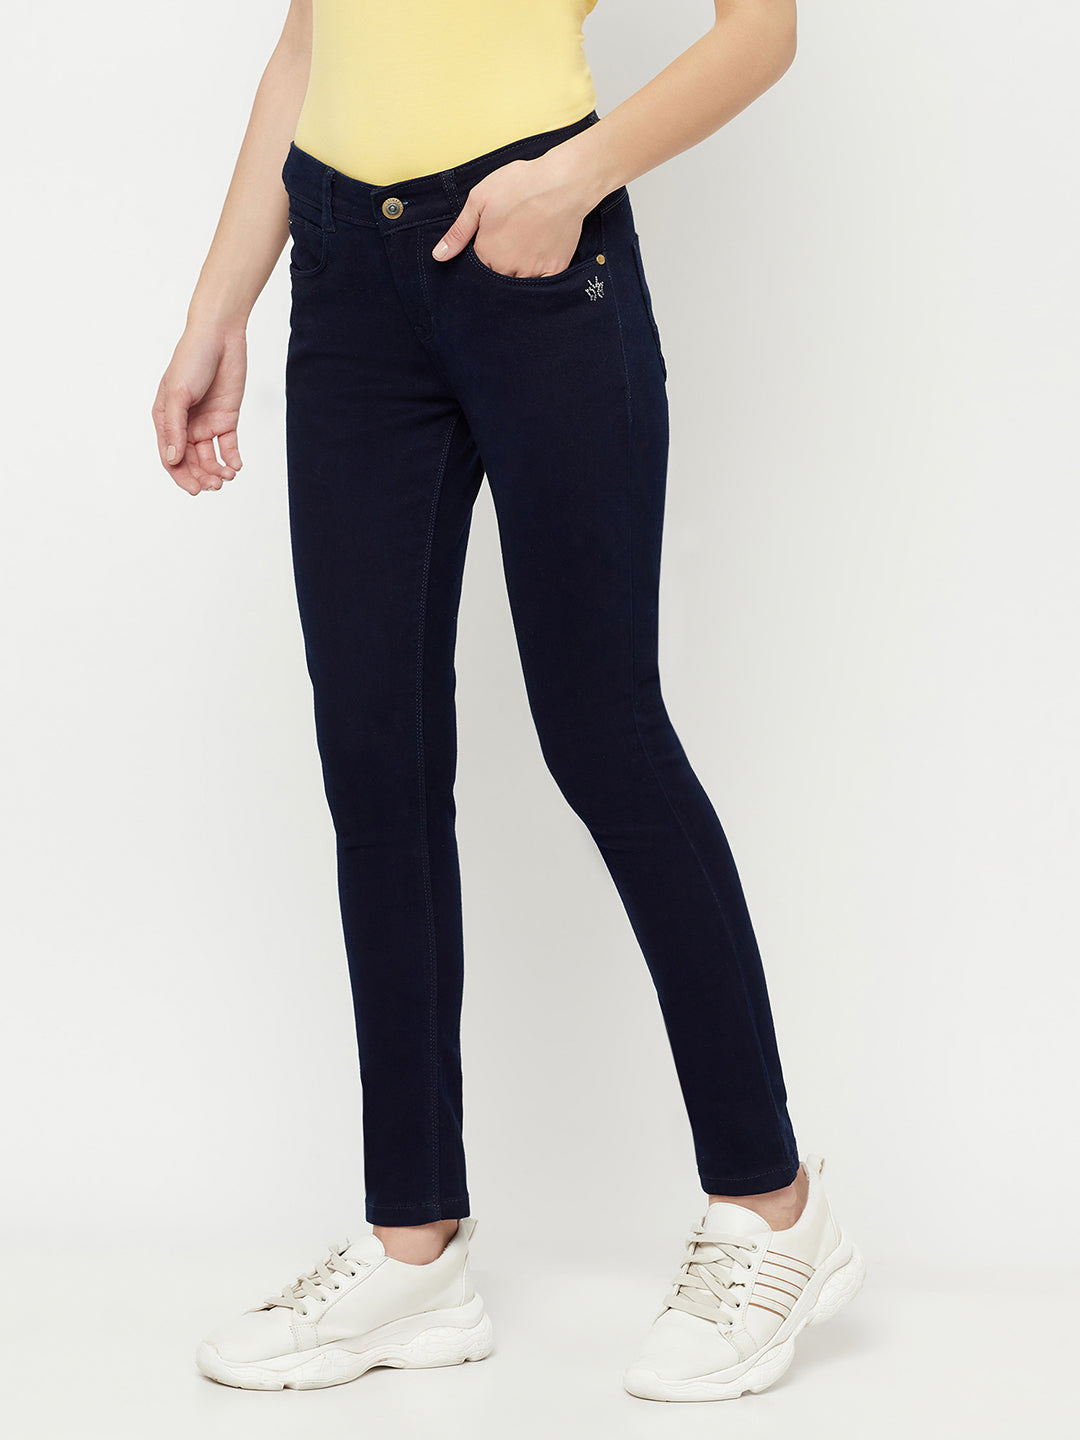 Navy Blue Ankle Length Jeans - Women Jeans